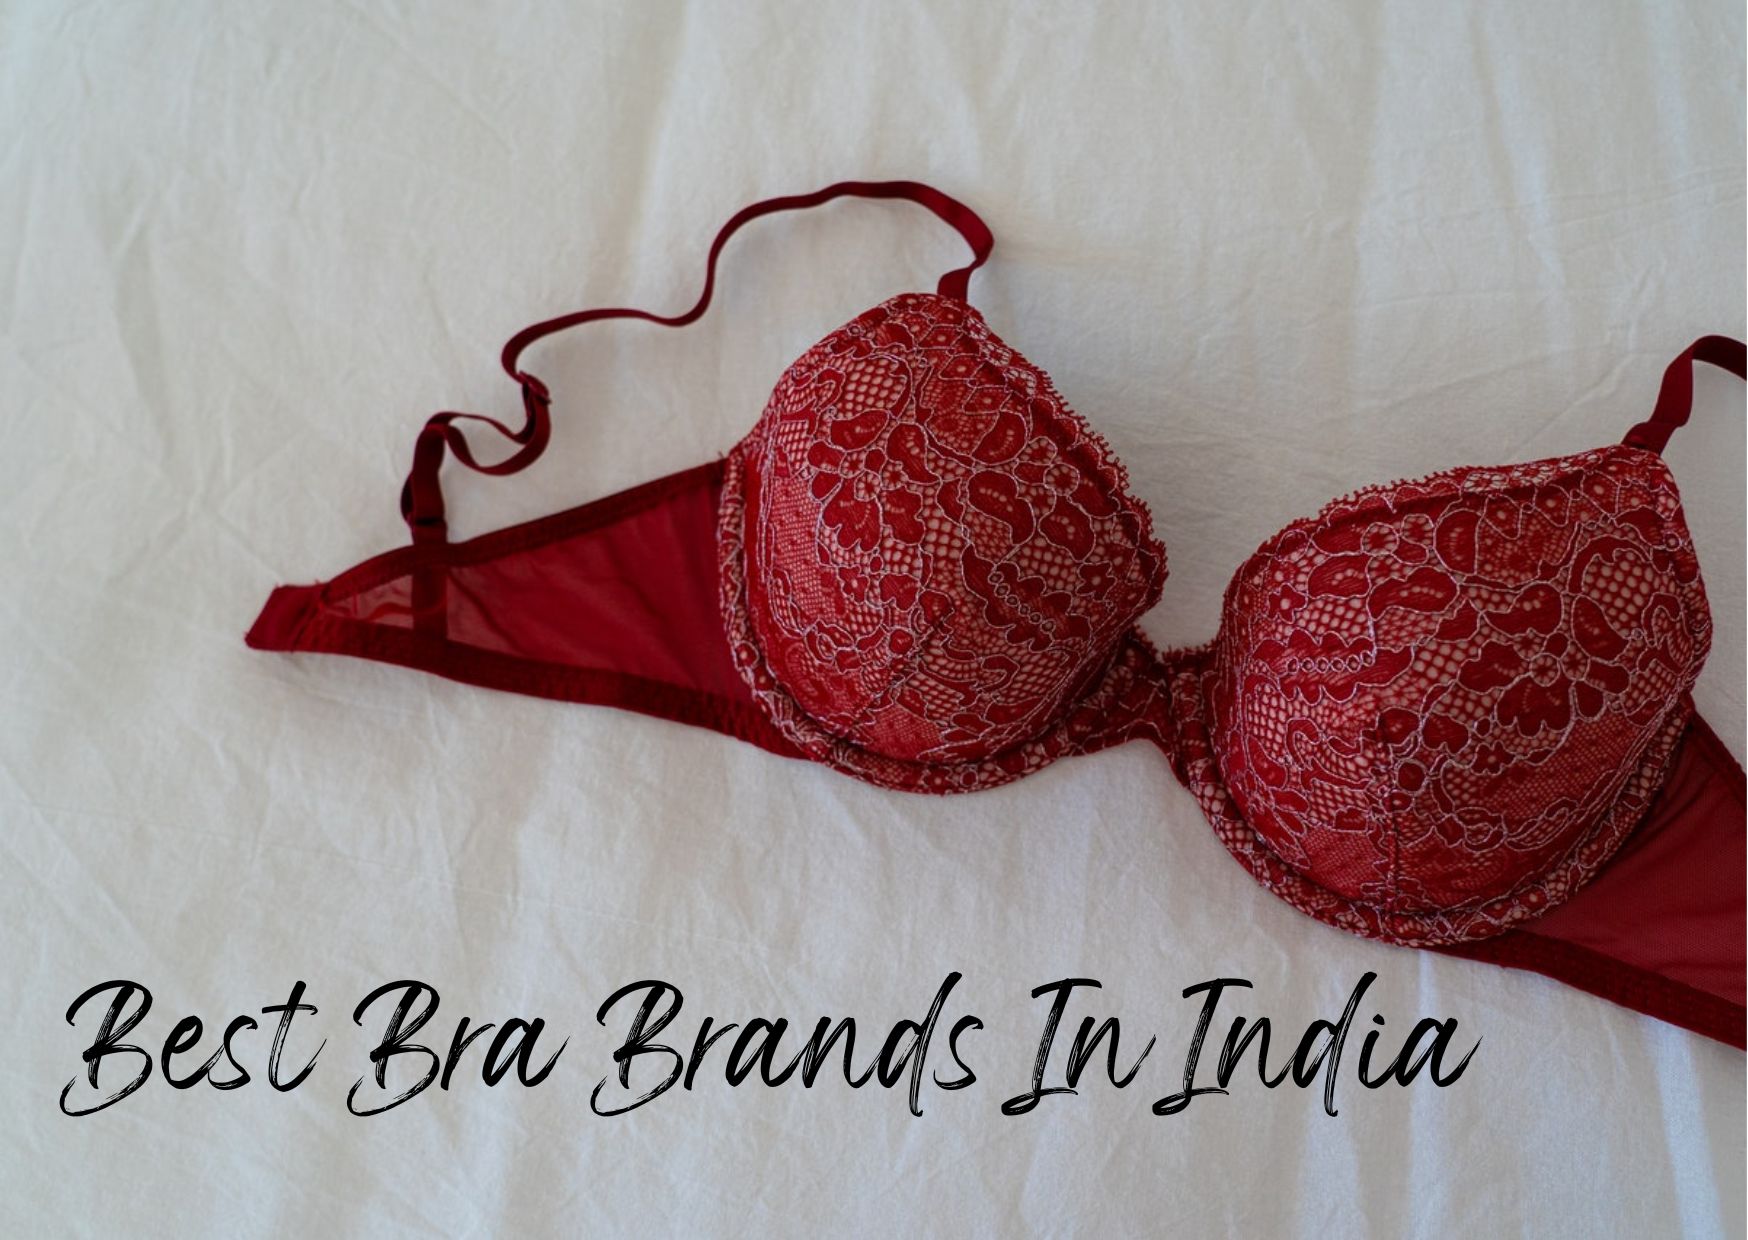 31 Best Bra Brands in India With Price - Starting from Rs. 108